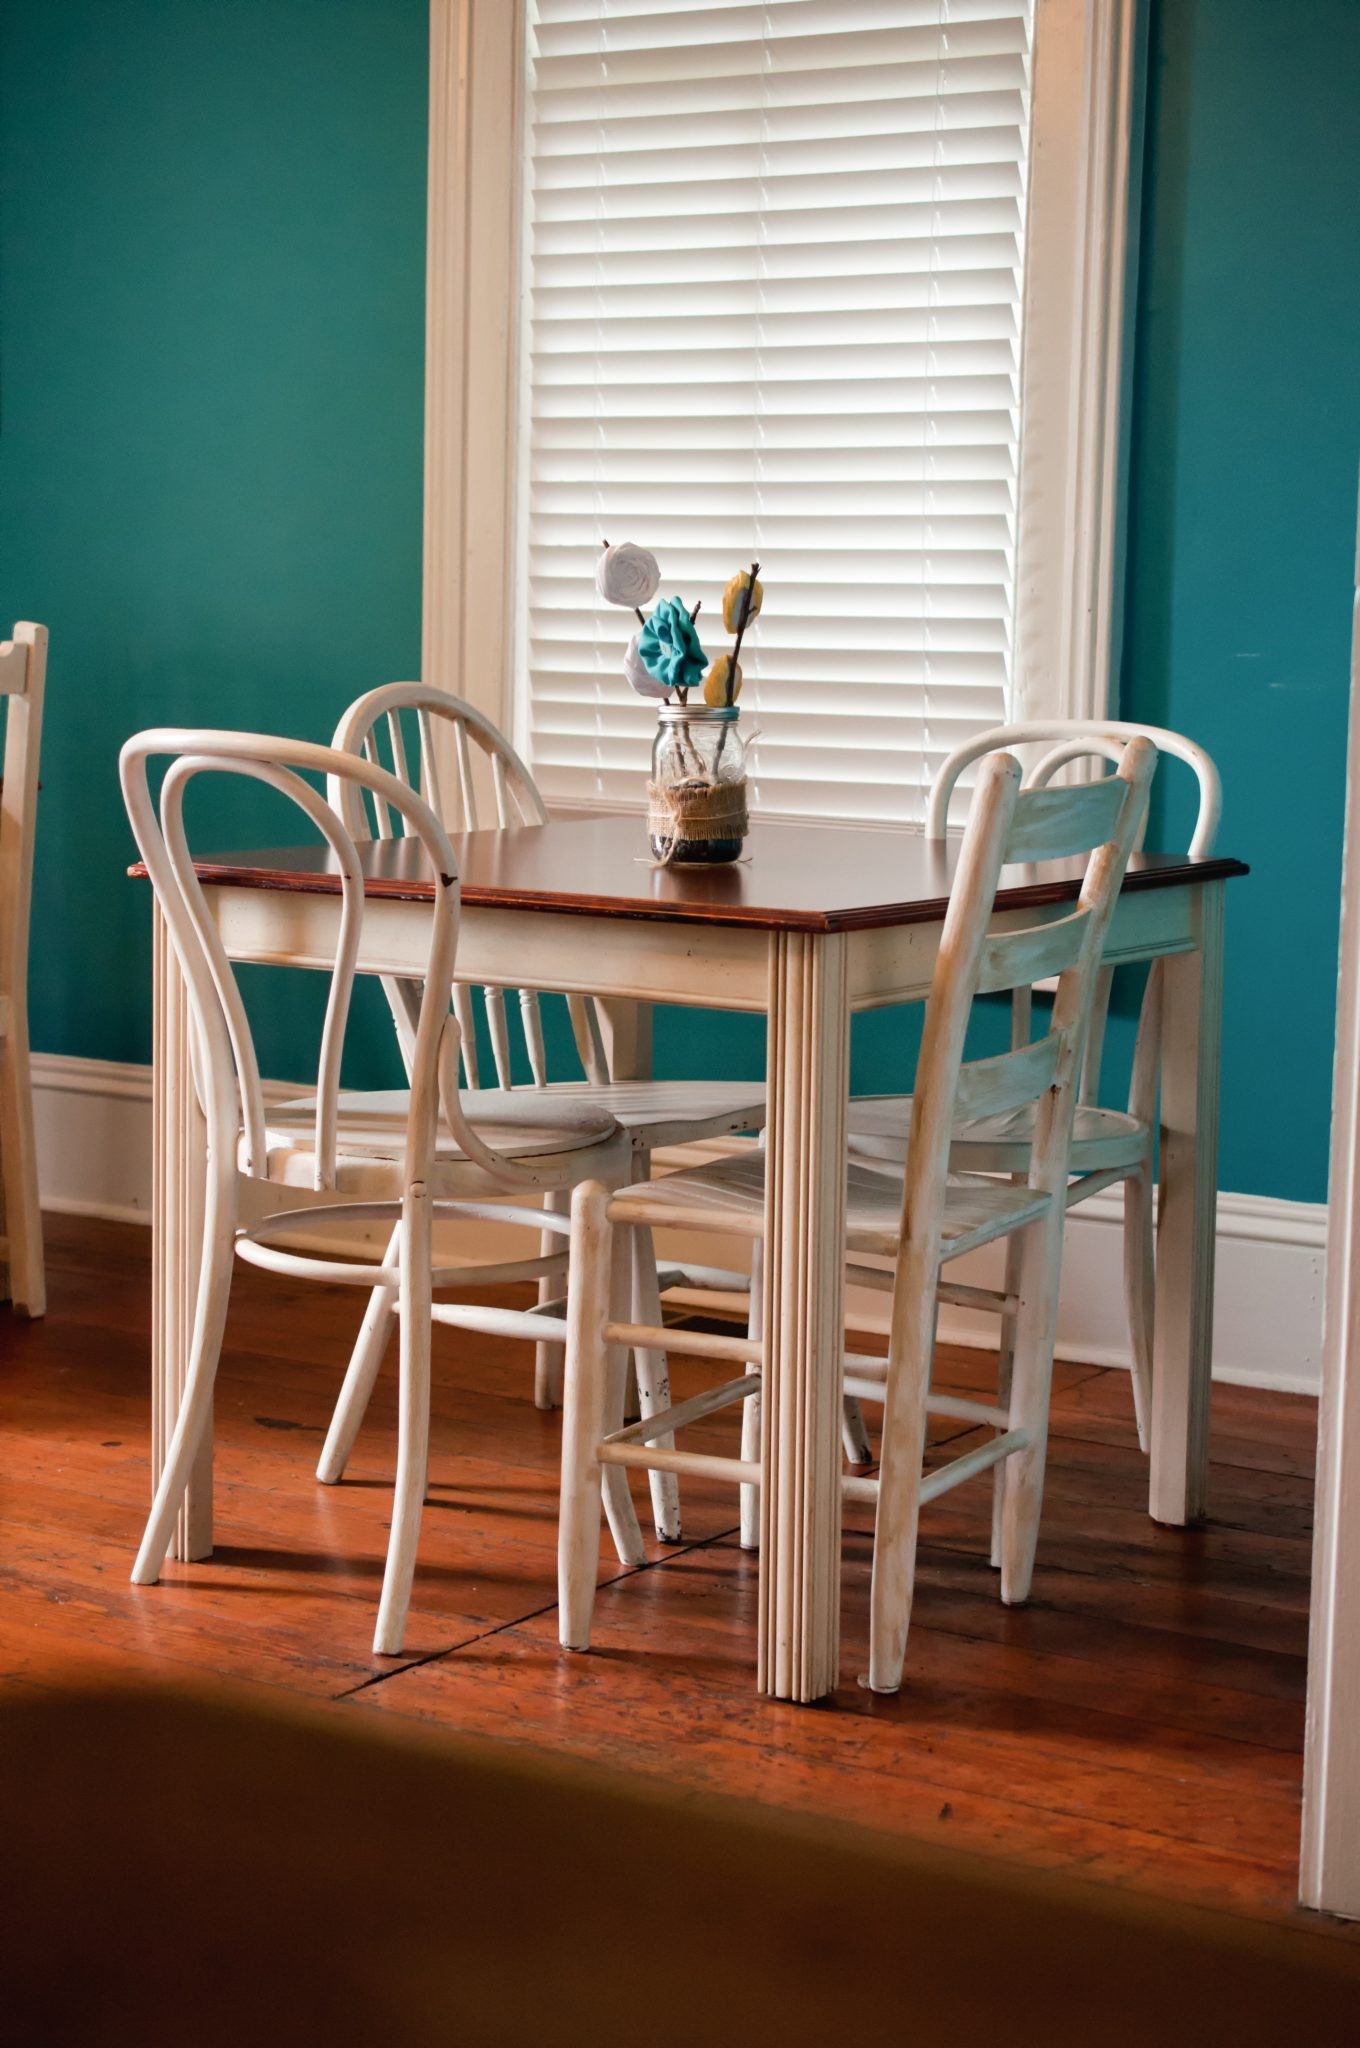 Renovating your home with chair home decor ideas